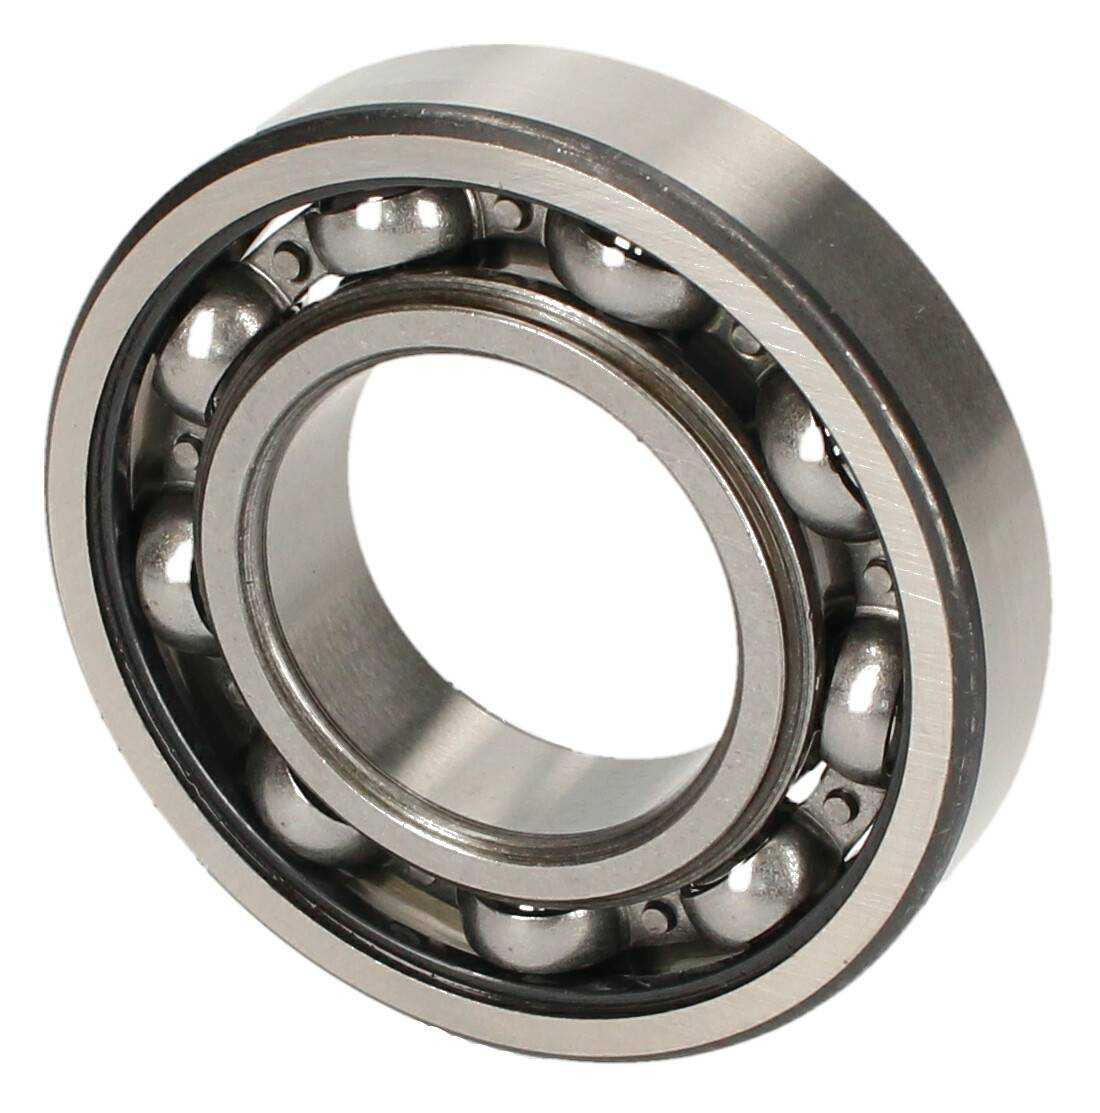 6012 BALL BEARING (WITHOUT PACKAGING) - Image 1